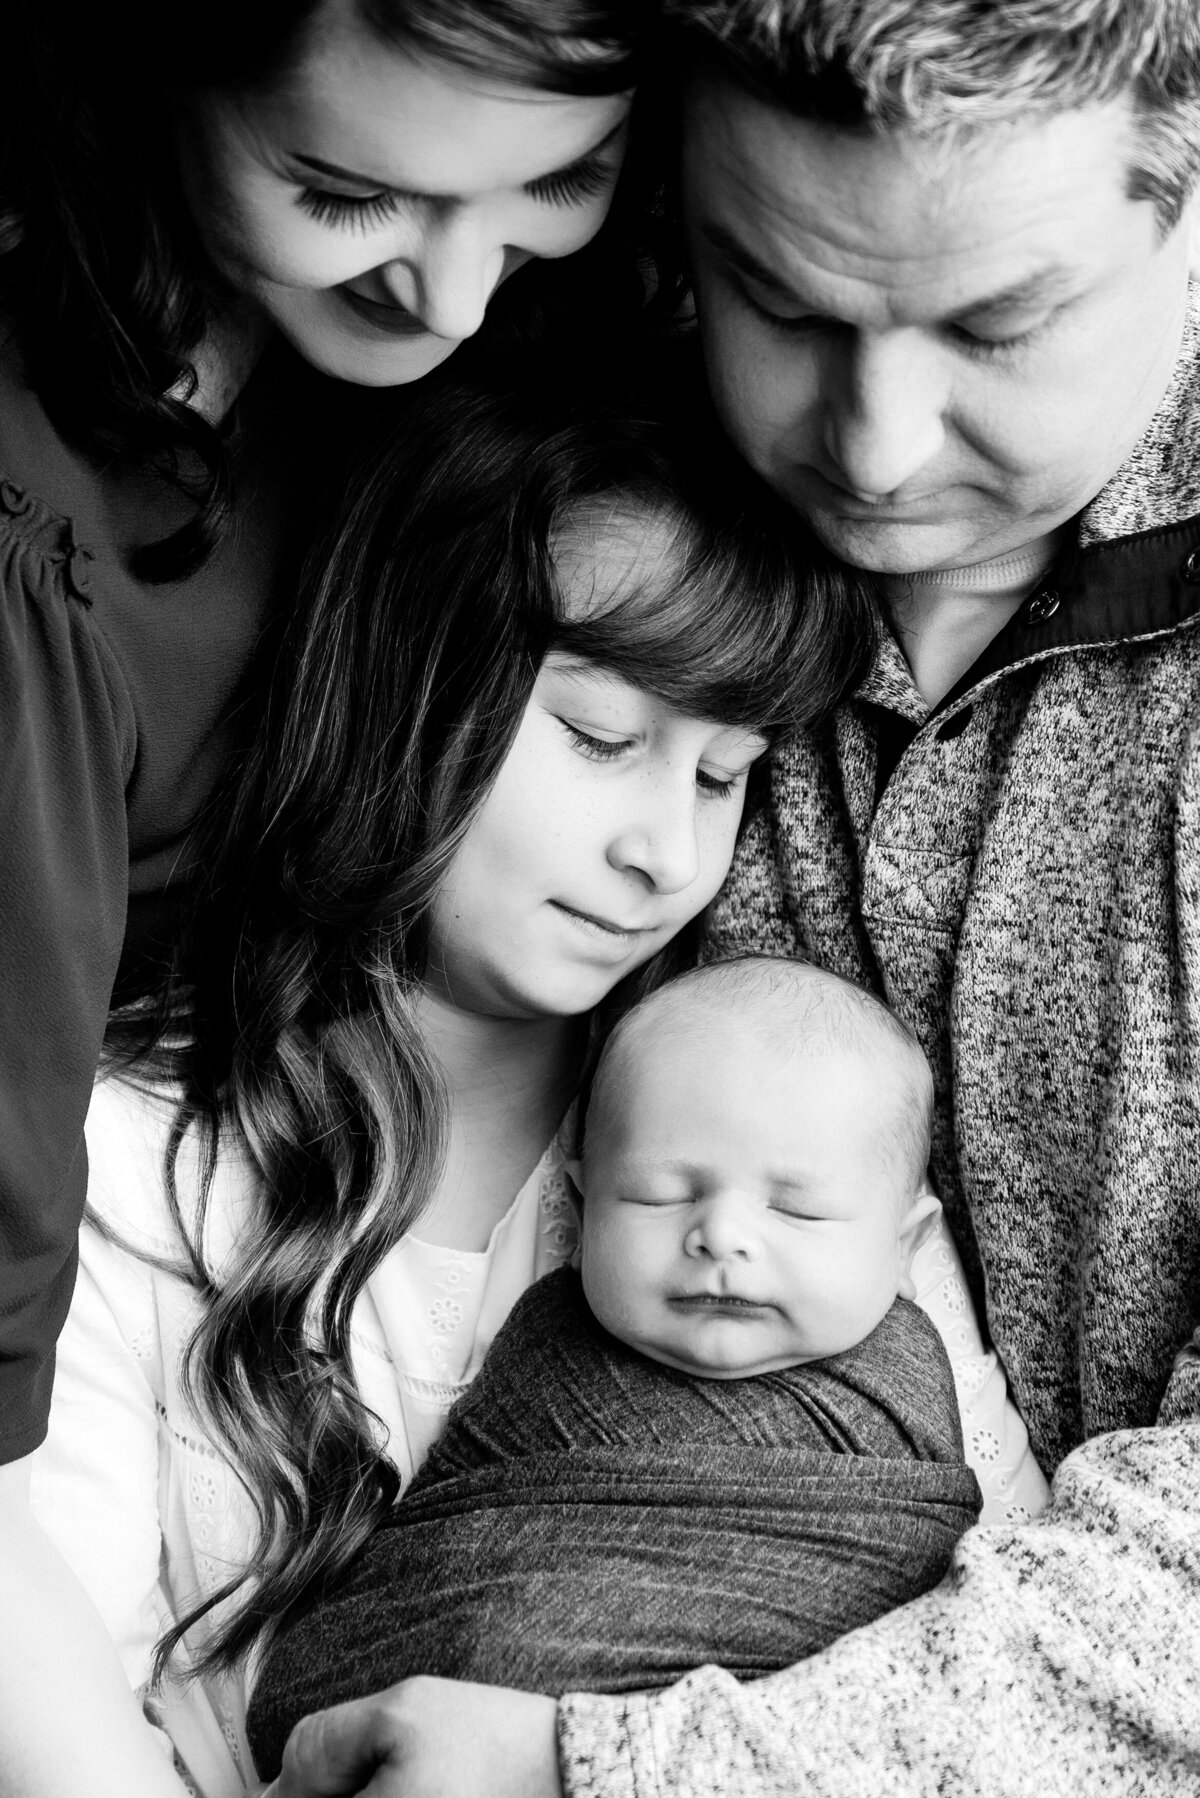 st-louis-newborn-photographer-blac-and-white-photo-of-baby-swaddled-and-held-by-older-sister-mother-and-father